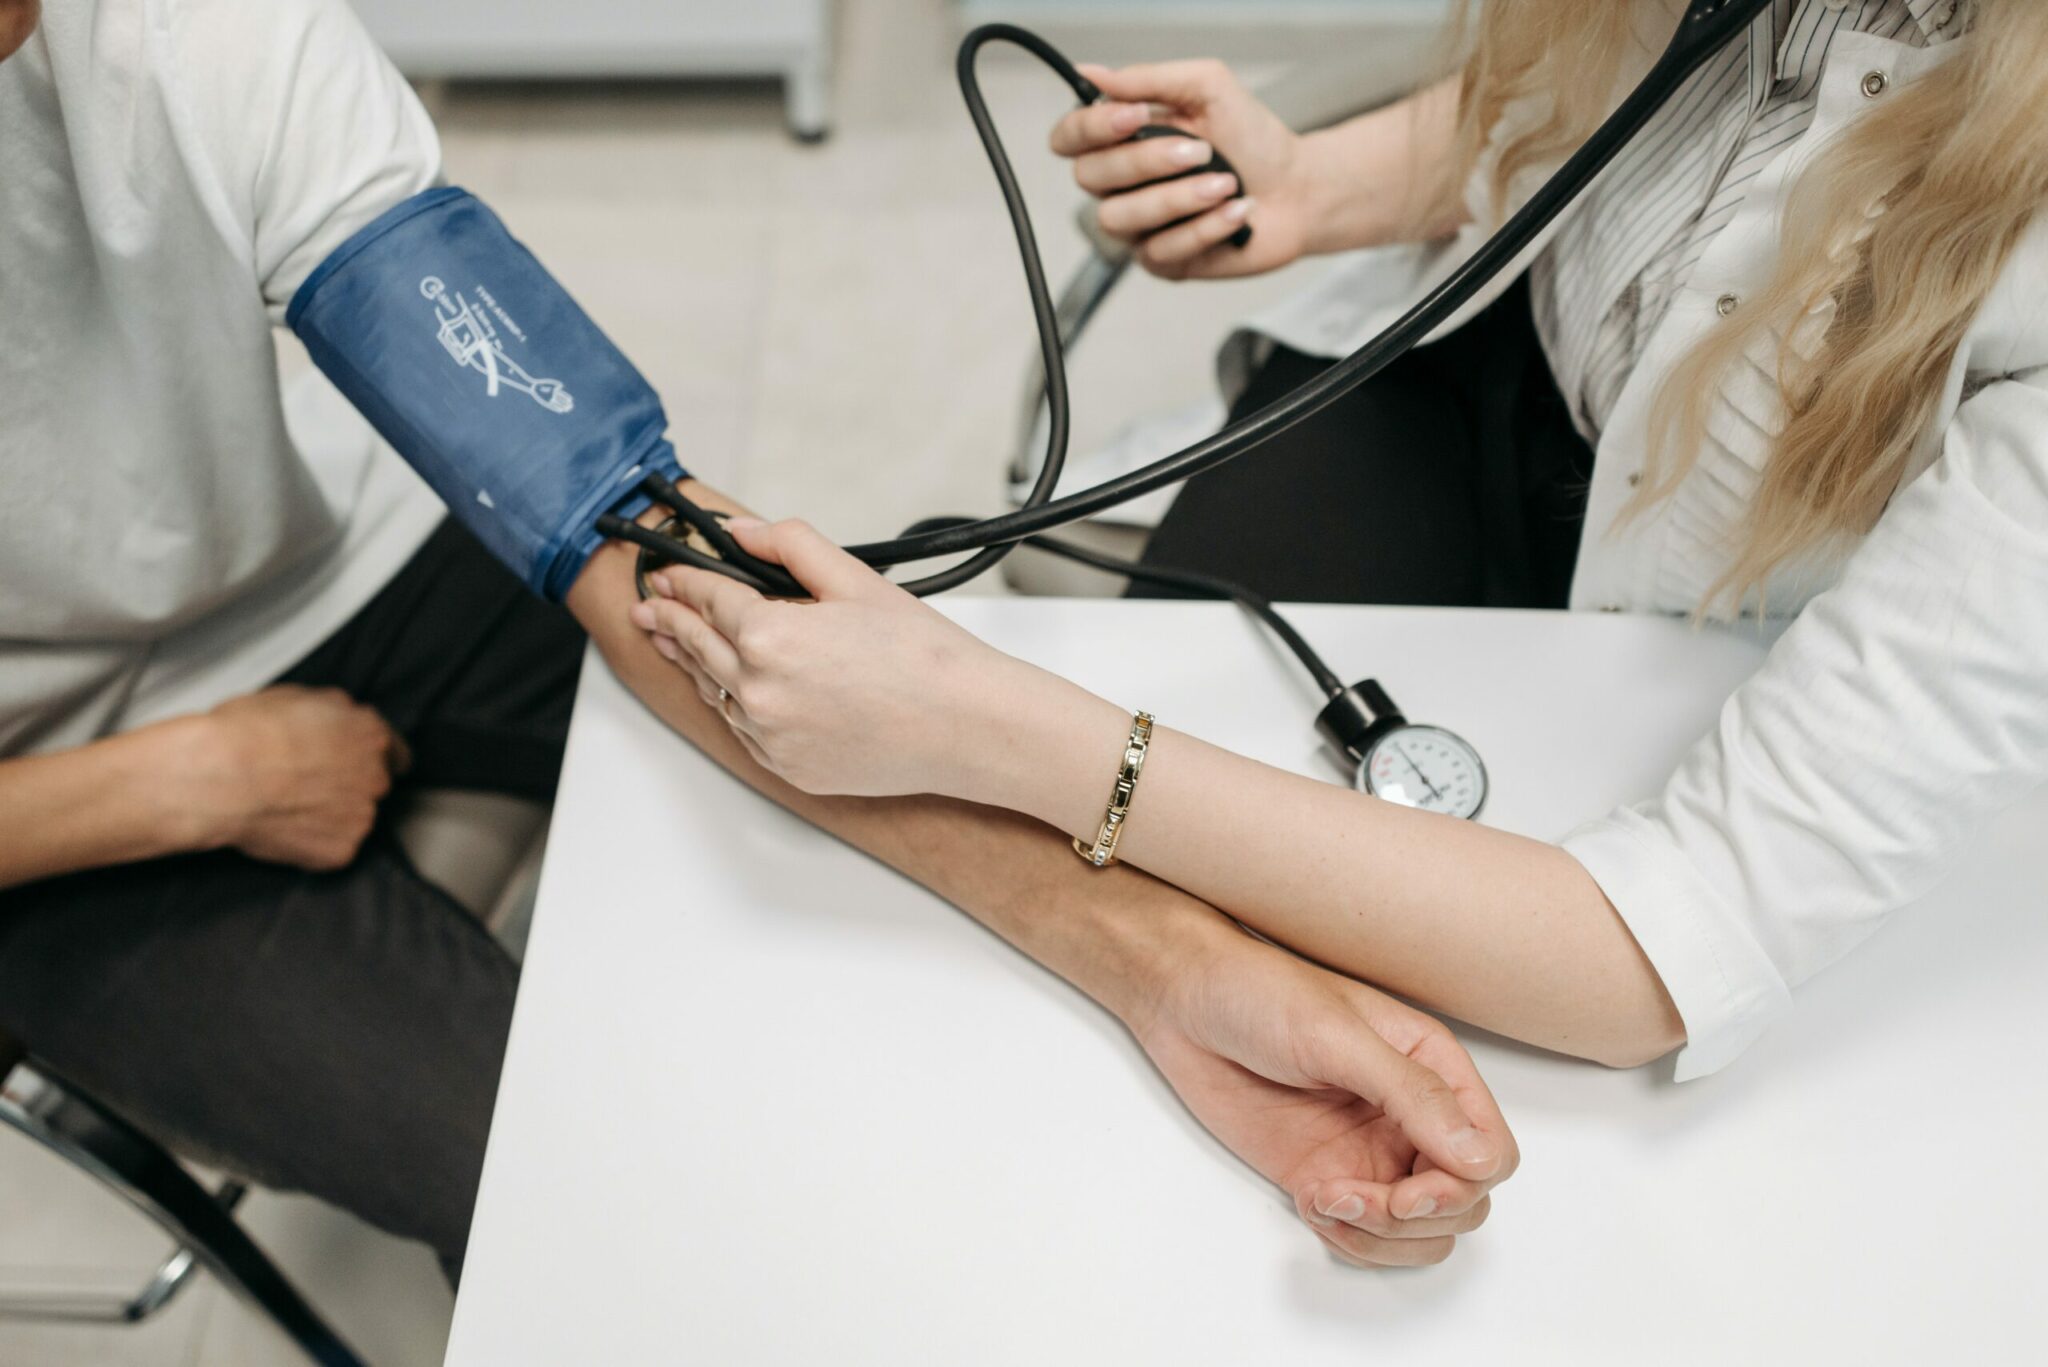 Photo by Pavel Danilyuk: https://www.pexels.com/photo/a-healthcare-worker-measuring-a-patient-s-blood-pressure-using-a-sphygmomanometer-7108344/